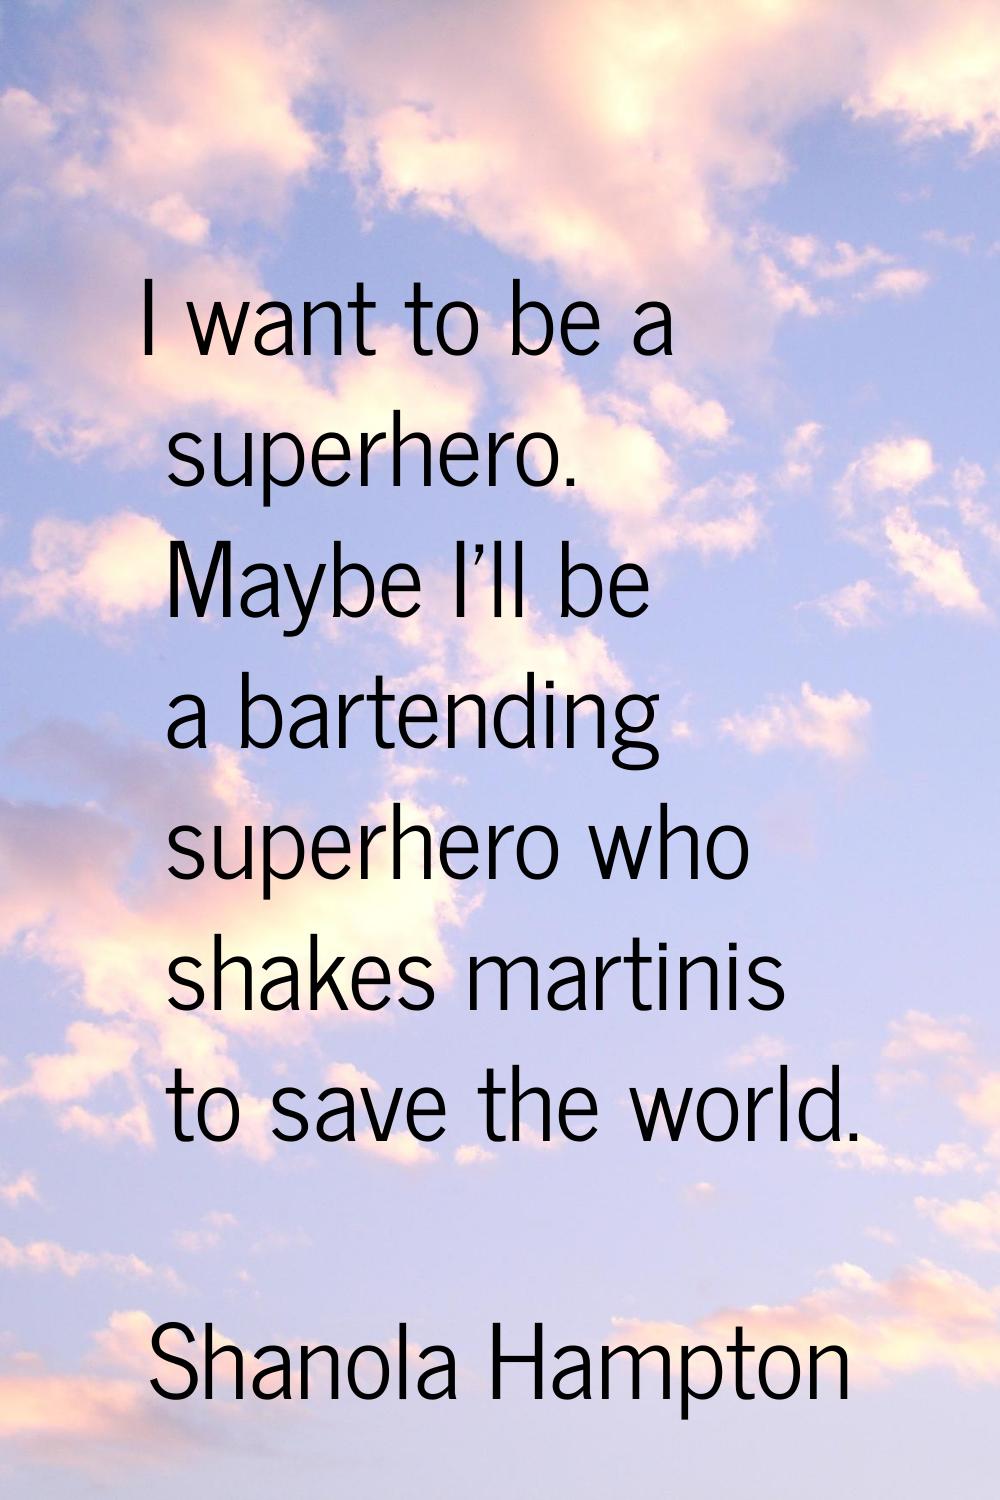 I want to be a superhero. Maybe I'll be a bartending superhero who shakes martinis to save the worl